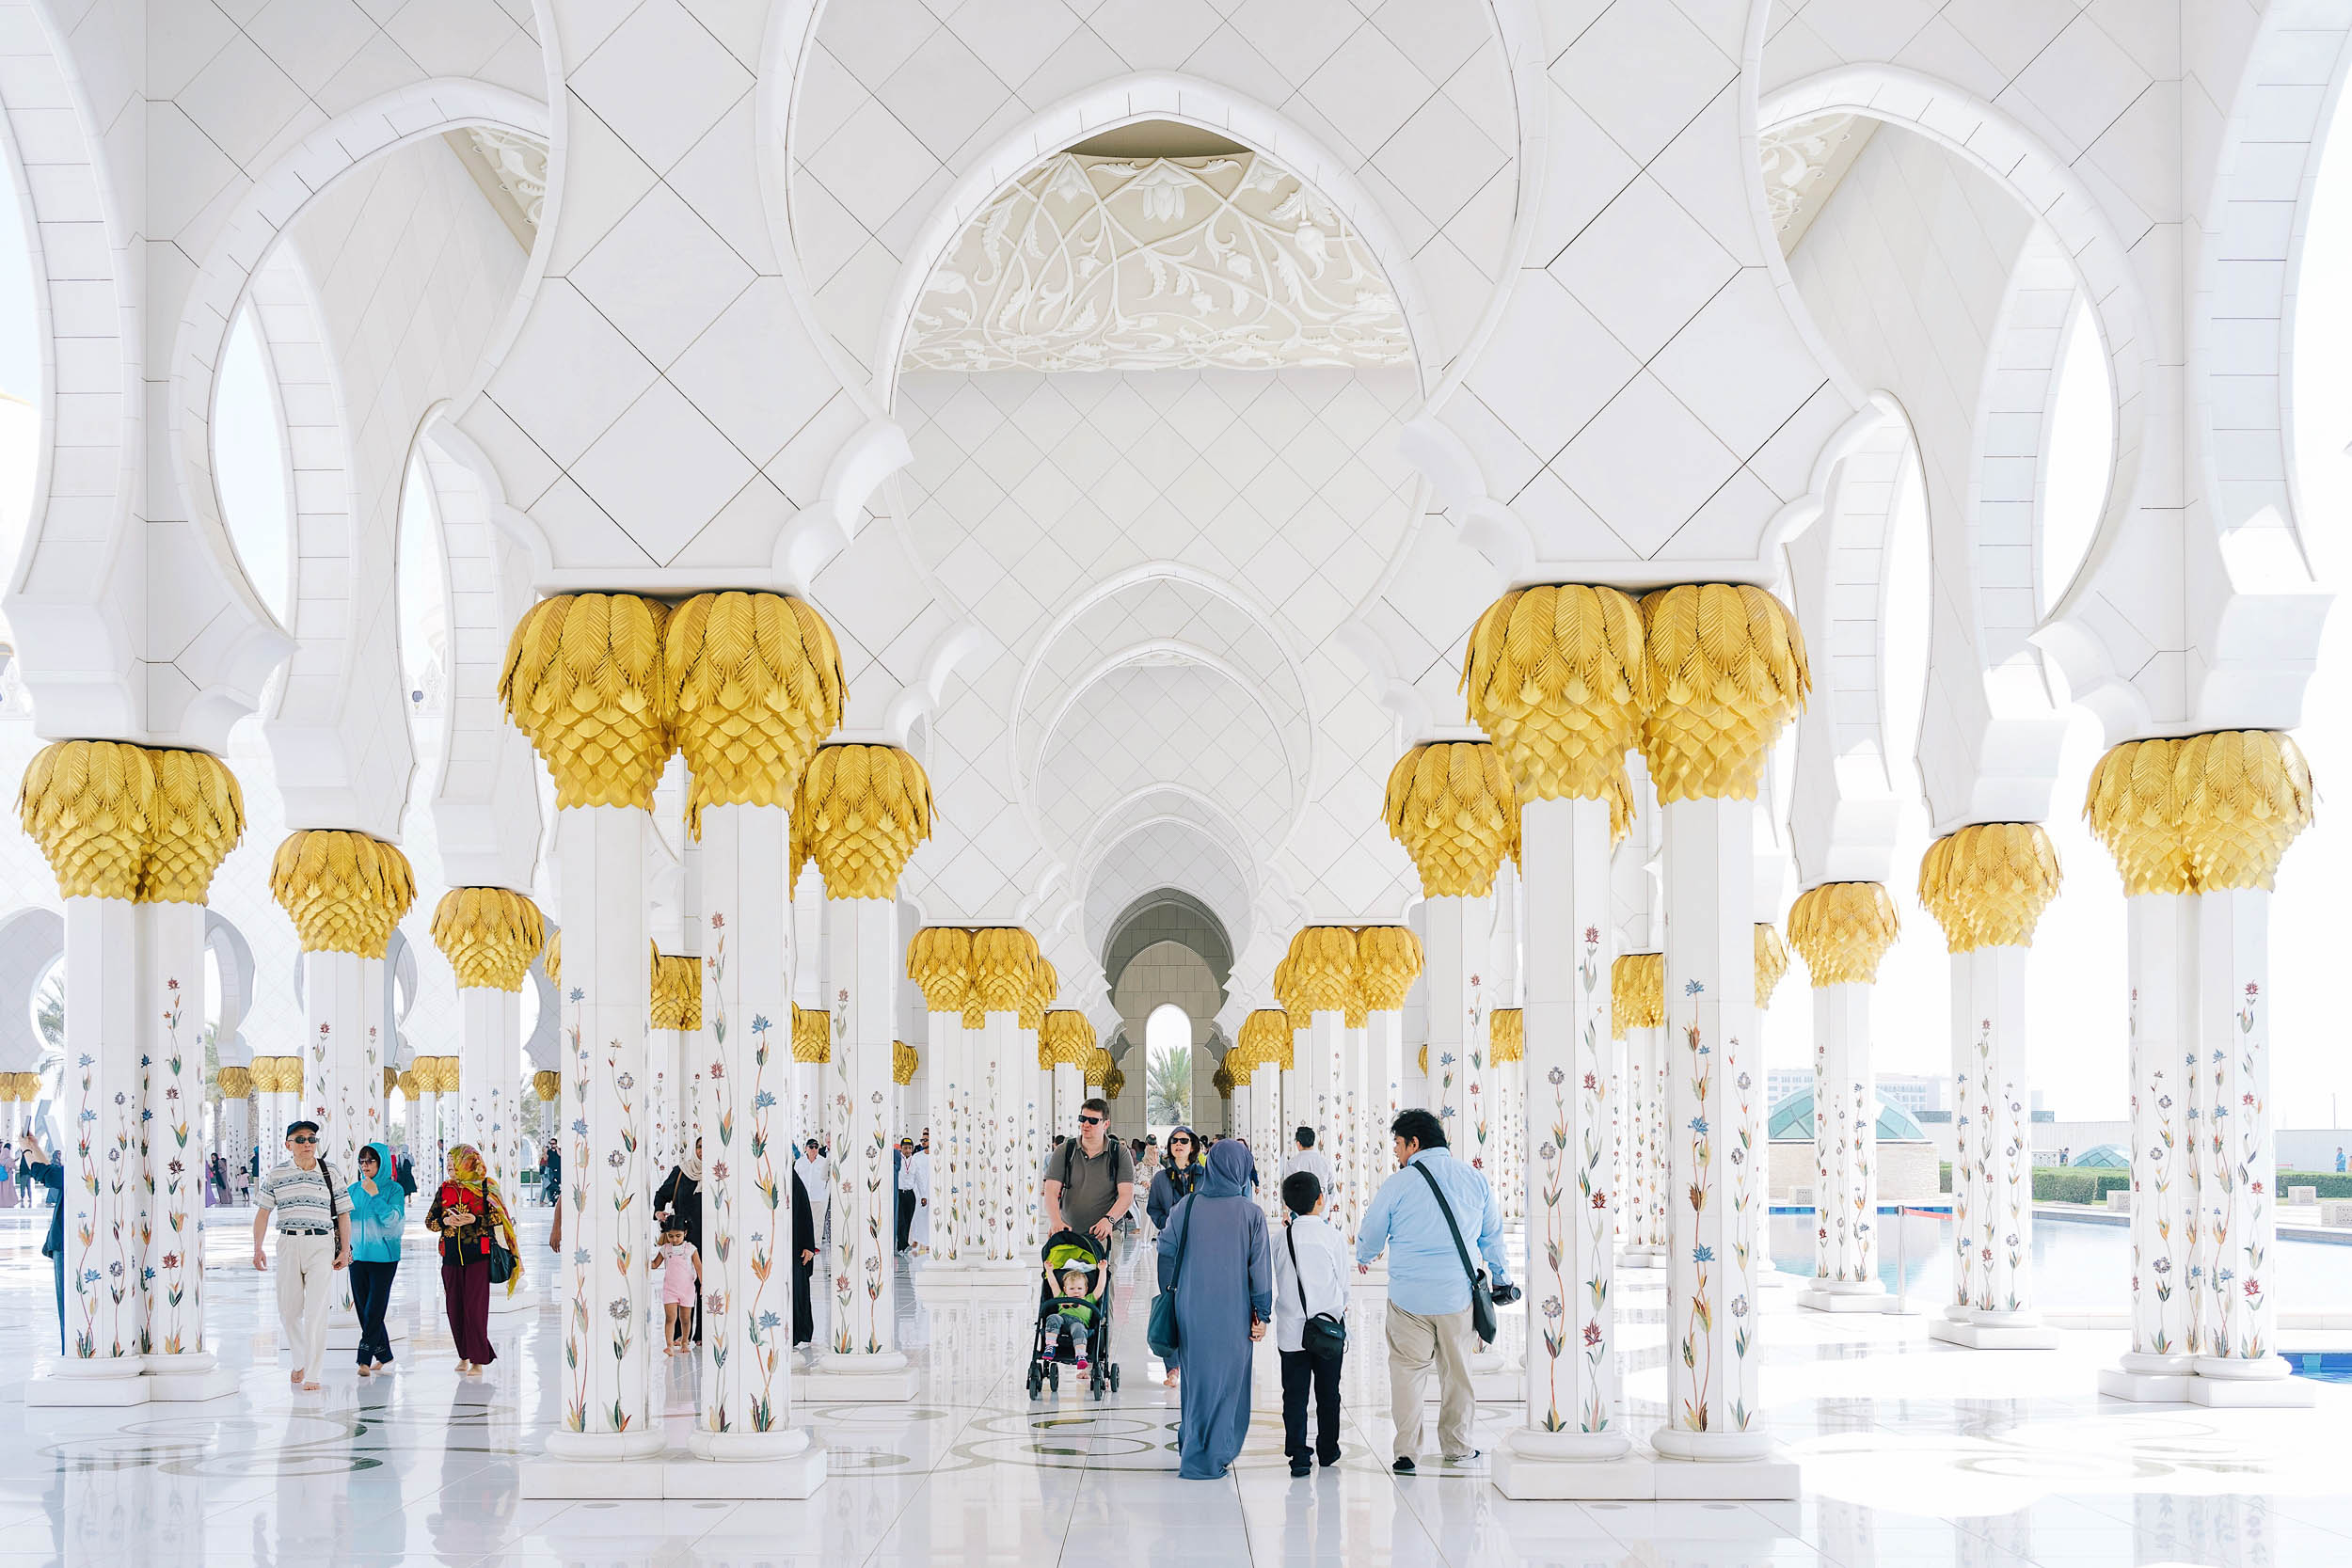 The Sheikh Zayed Grand Mosque is an unbelievably beautiful mosque in the city of Abu Dhabi, about an hour from Dubai.